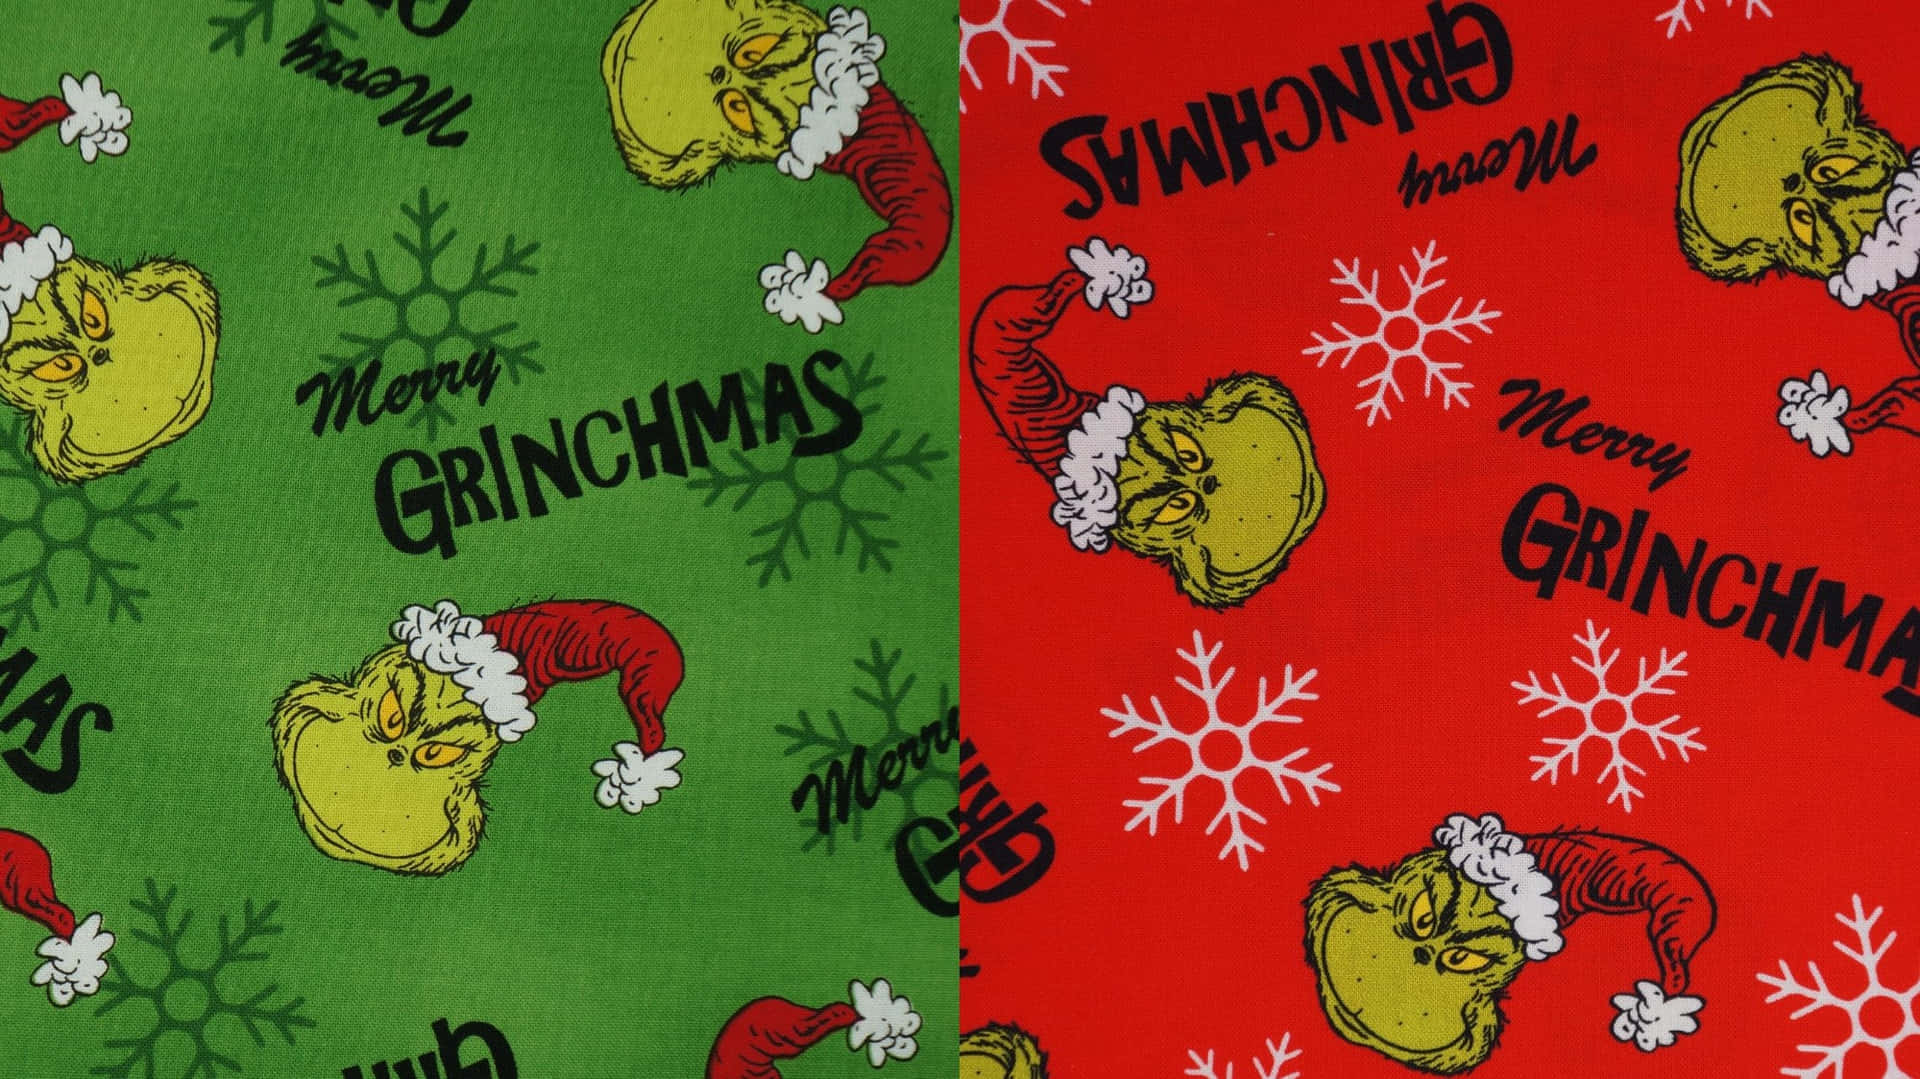 Spread Holiday Cheer with Grinch Zoom